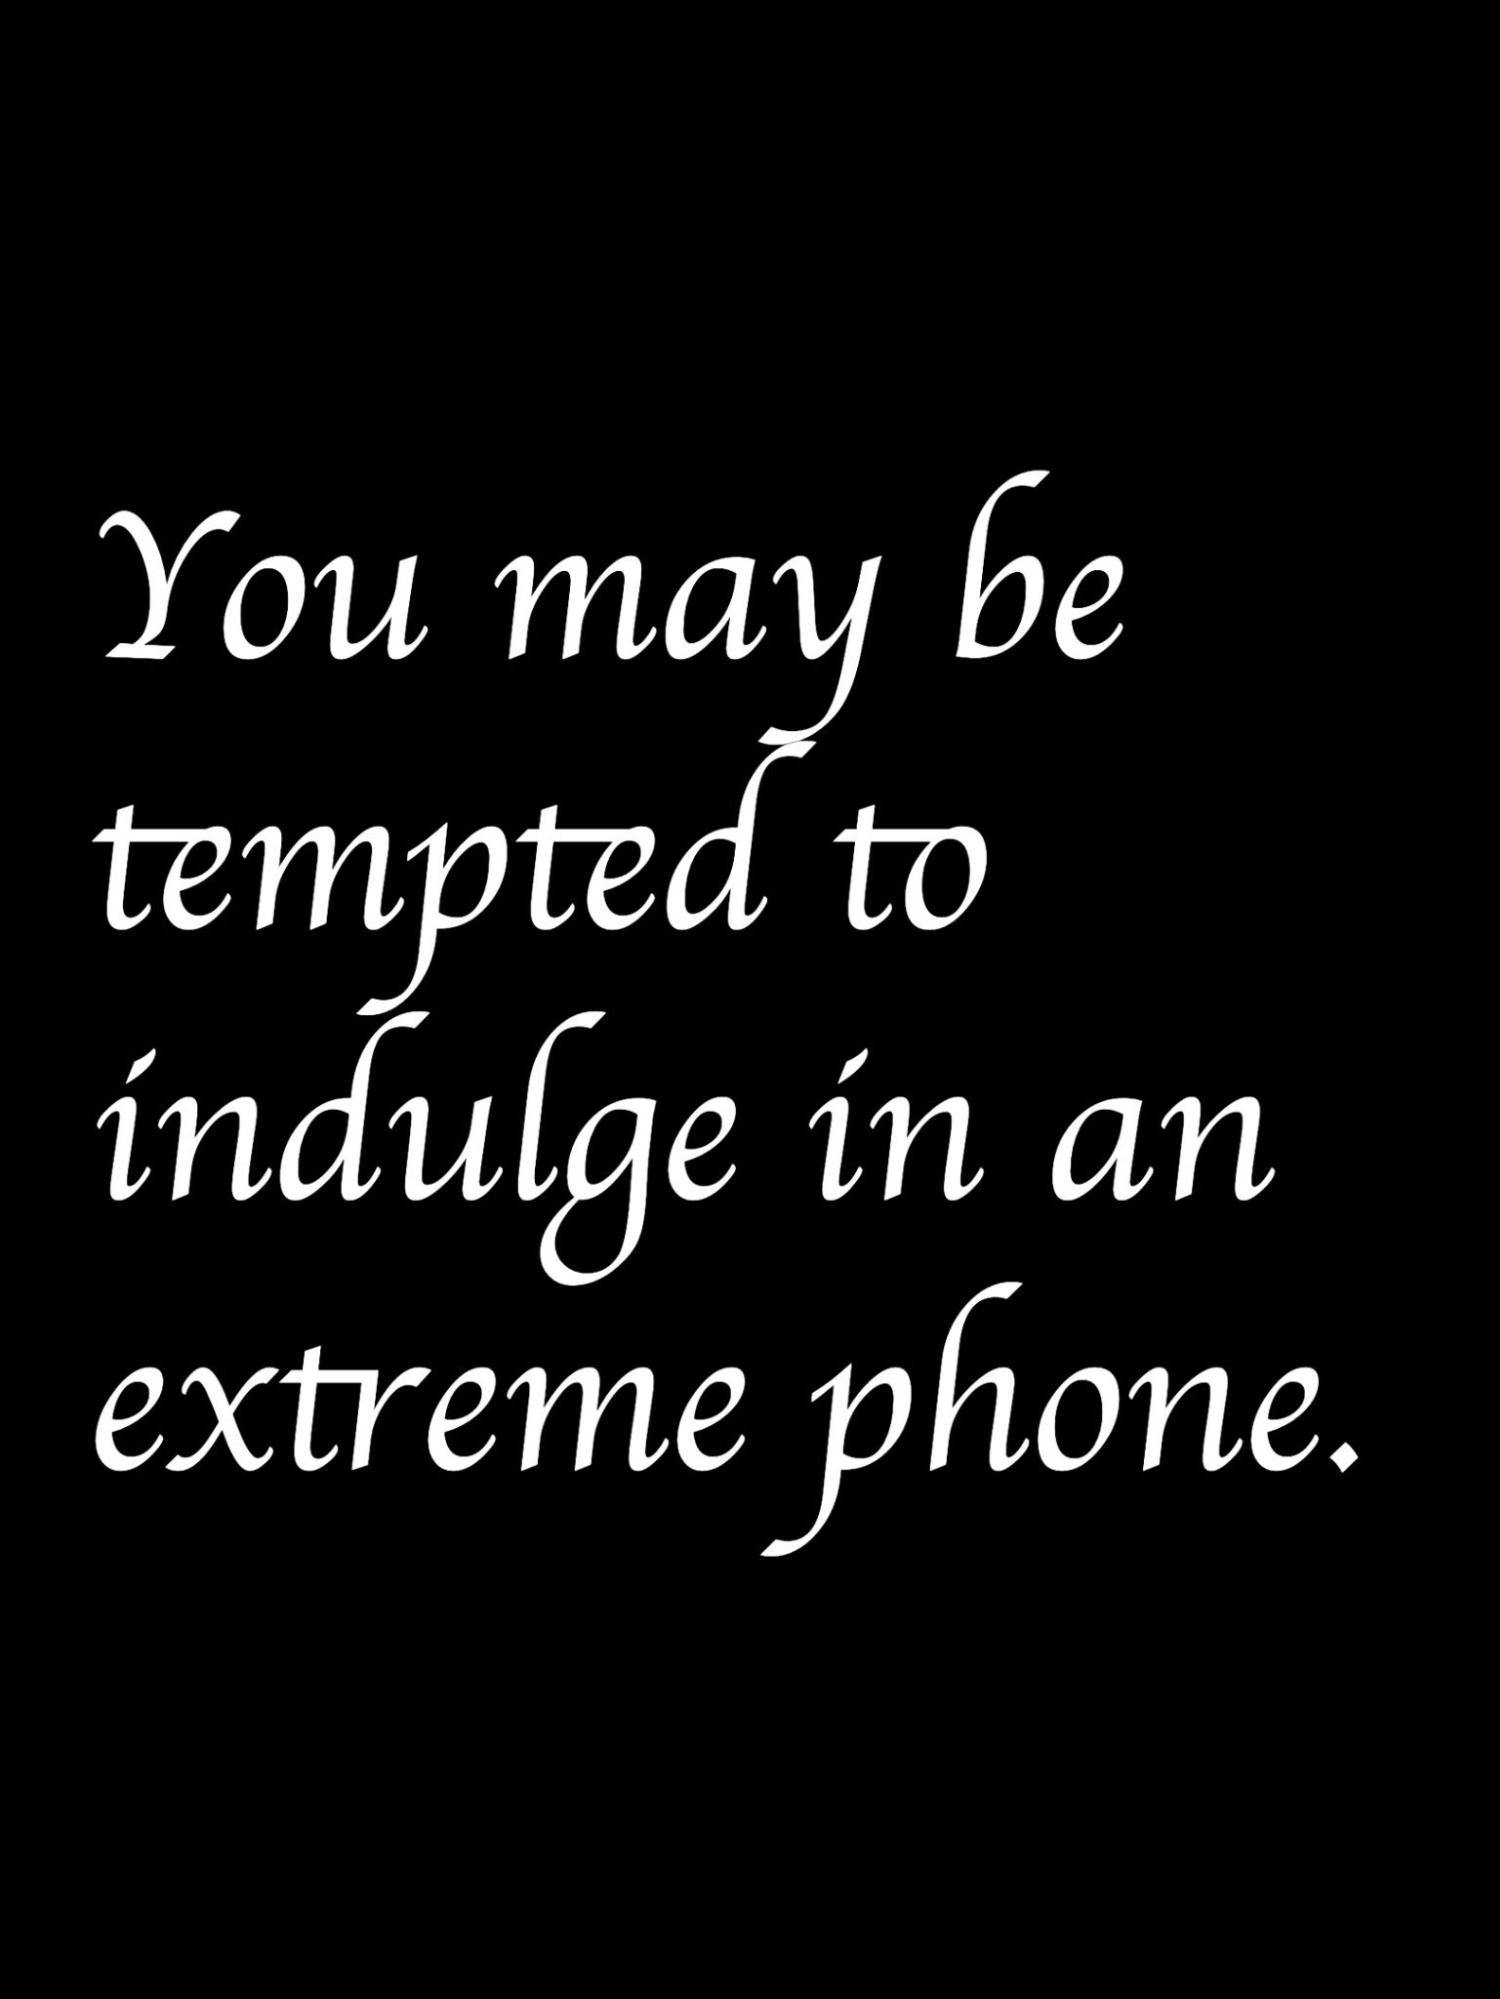 I’m Feeling Lucky #270. [A black background with white script that reads “You may be tempted to indulge in an extreme phone.” A similar style as the first image, but with no ornamentation.]